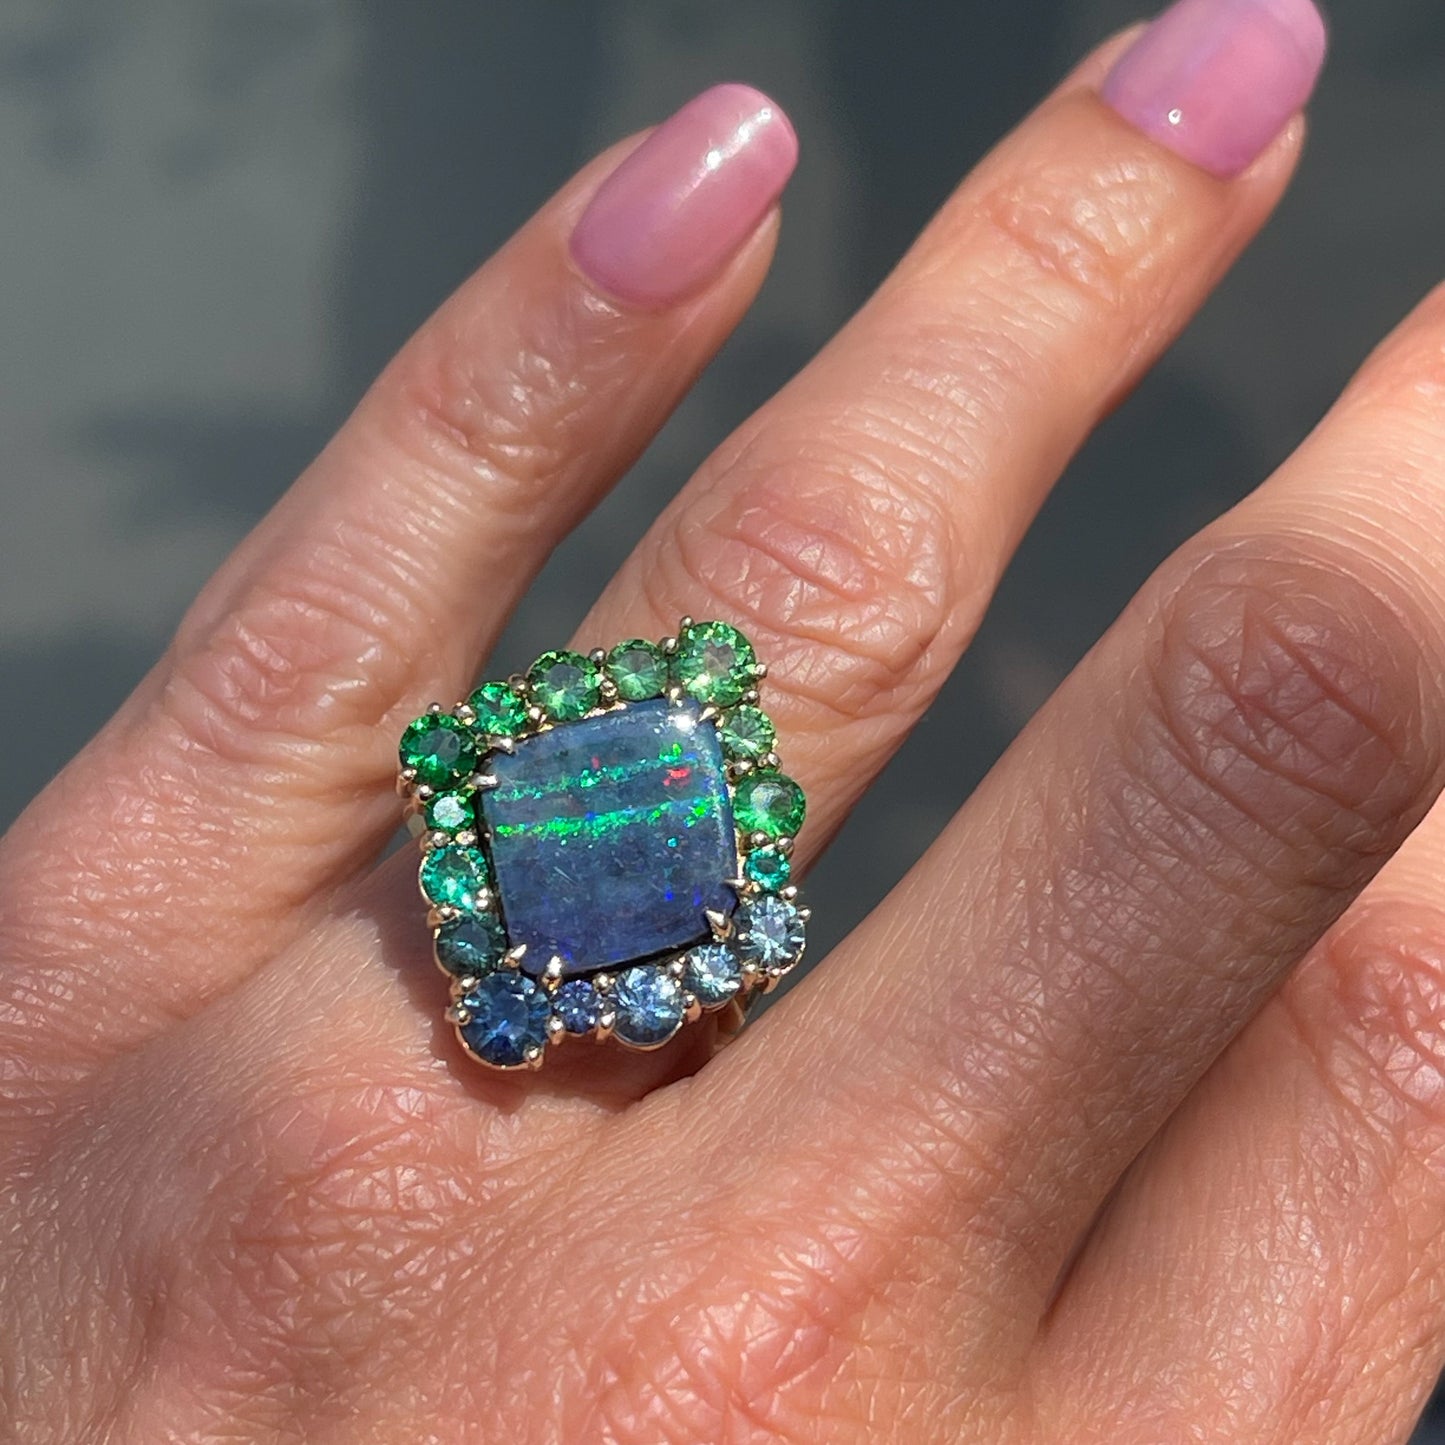 An Australian Opal Ring by NIXIN Jewelry. A Boulder Opal ring with a halo of precious gemstones.